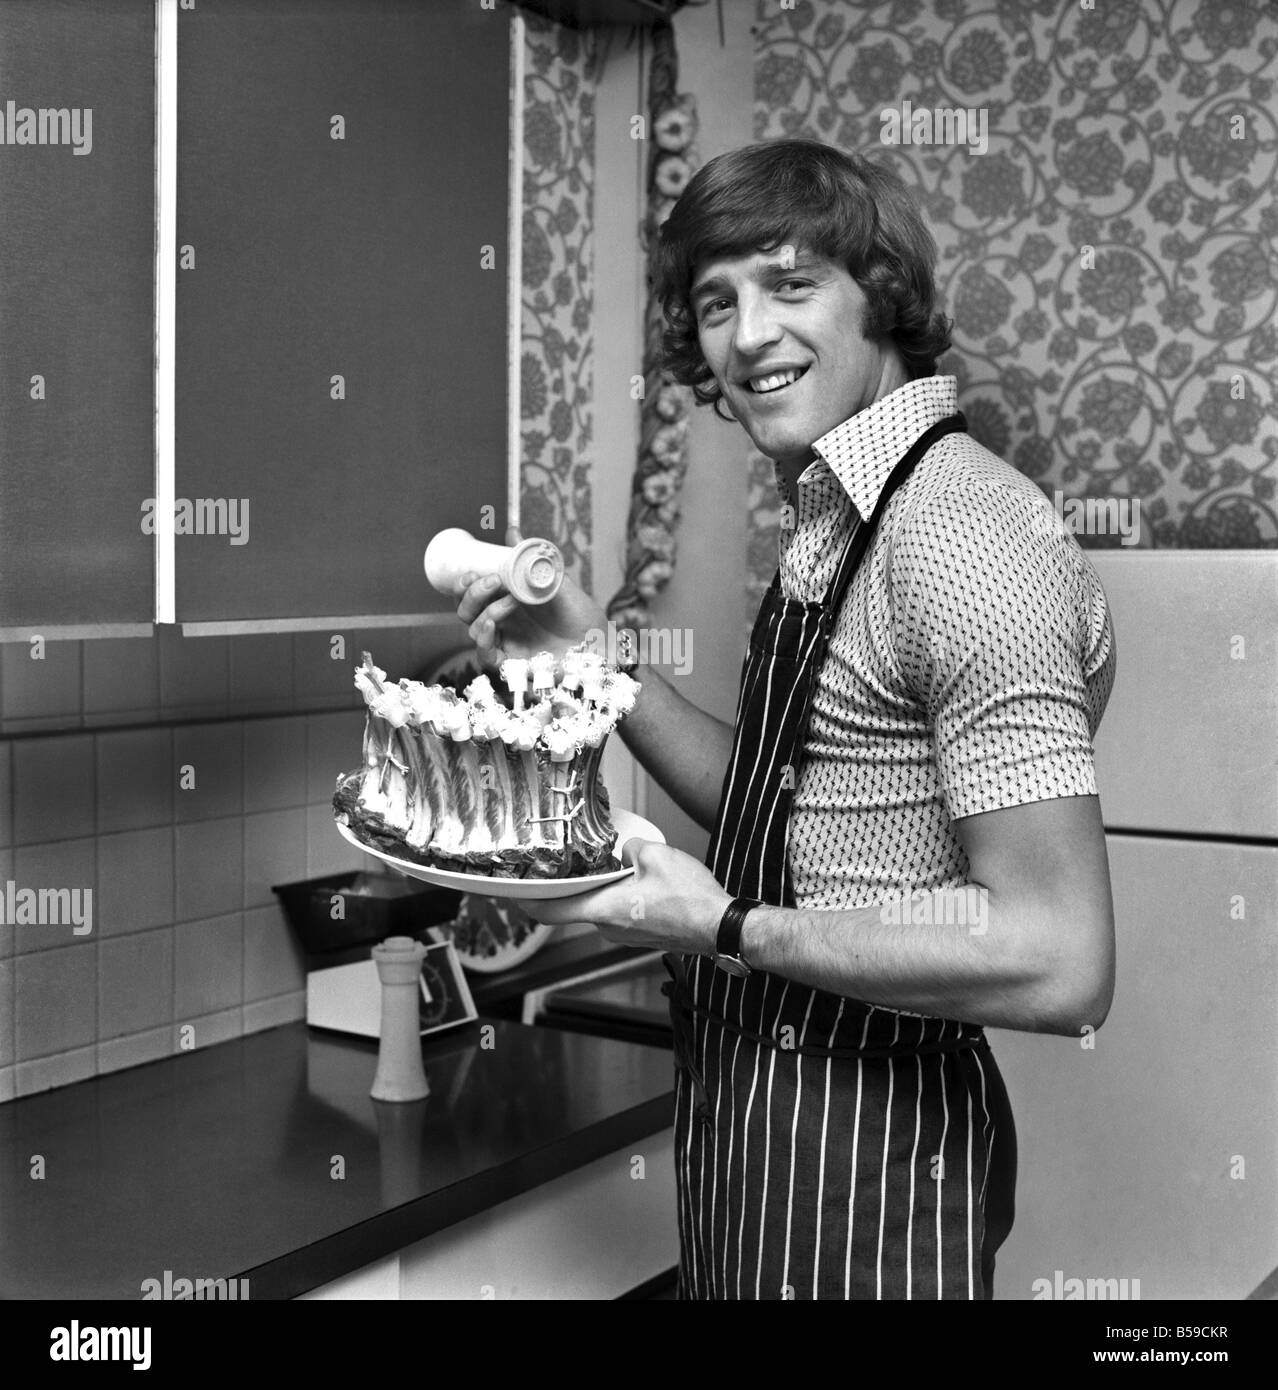 Chelsea striker Ian Hutchinson Prepares a meal for some of his team mates at his home in Worcester Park. Ian is a Batchelor and Stock Photo